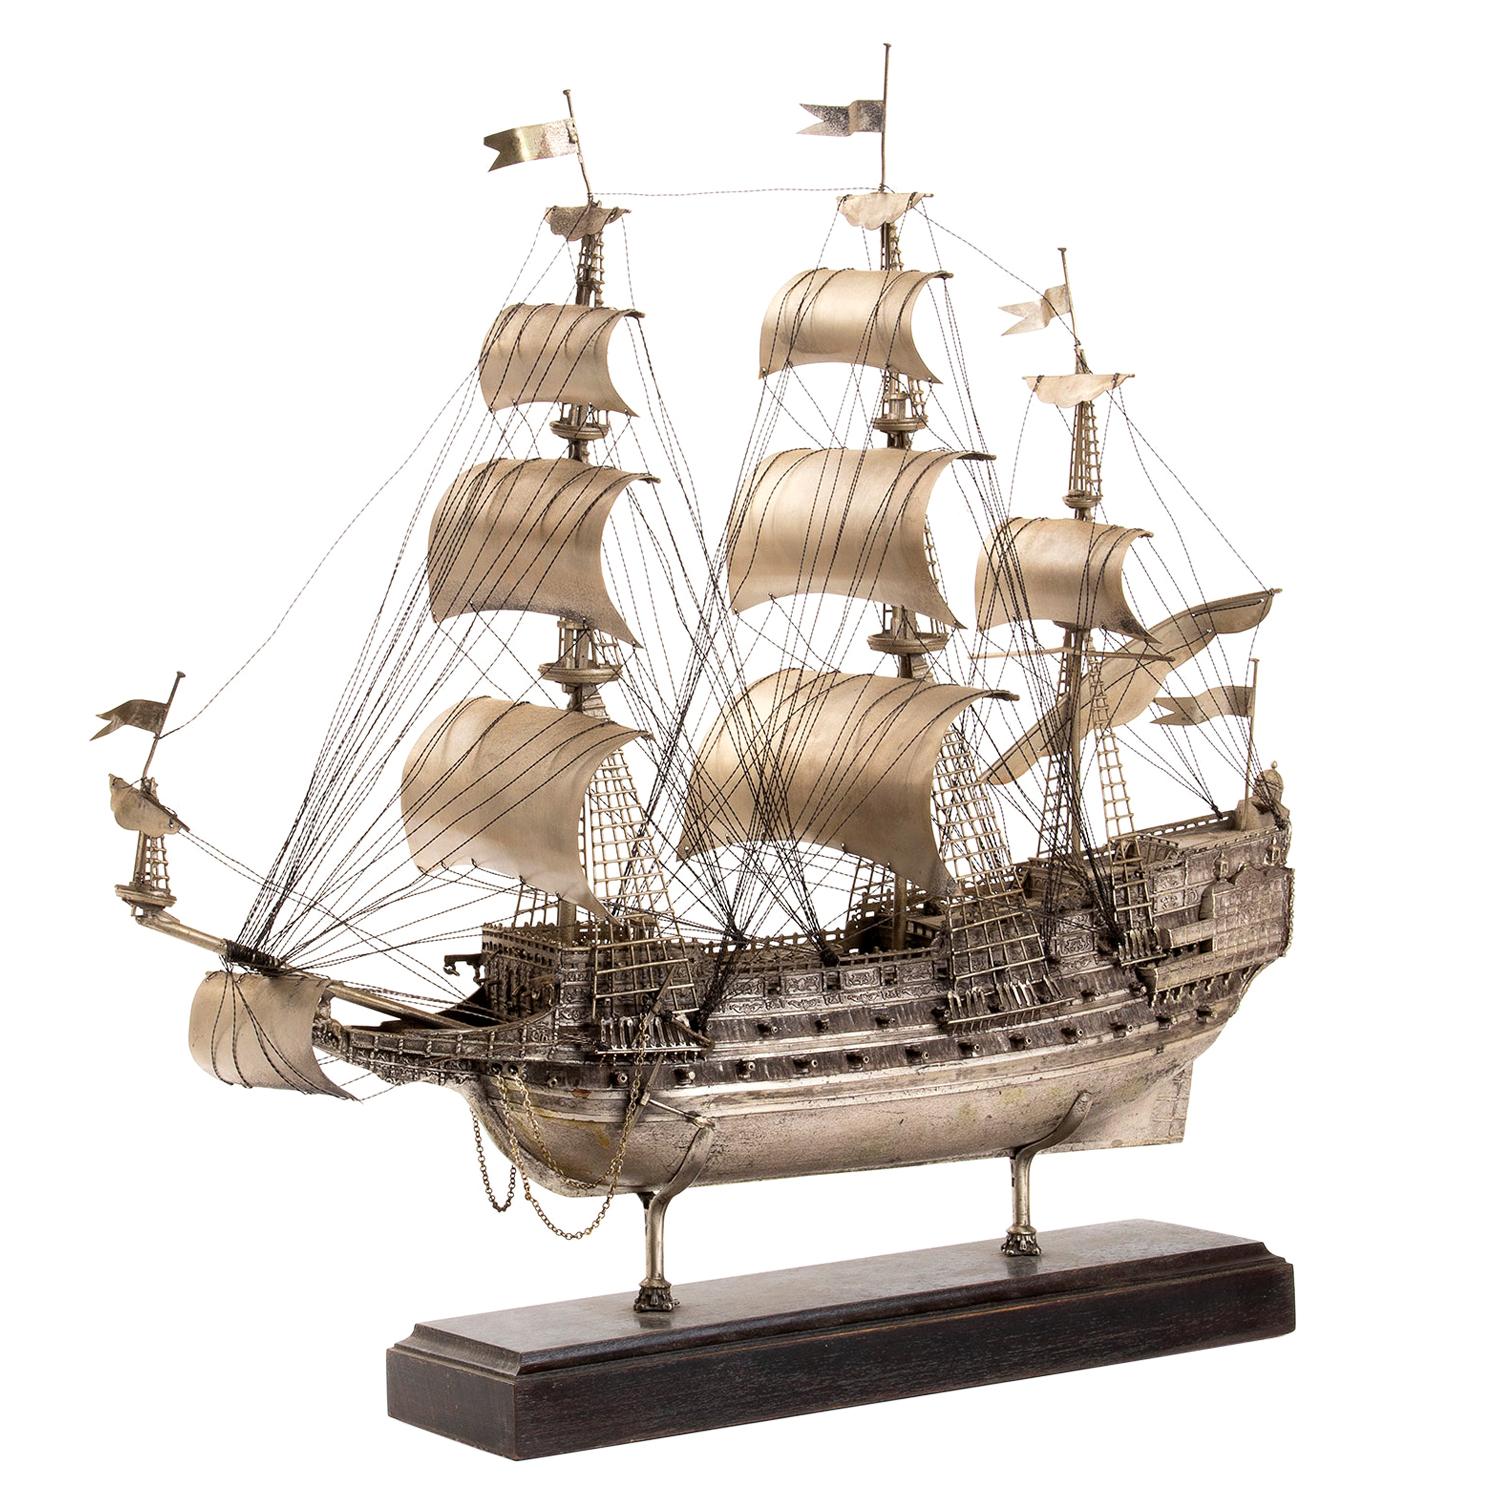 Vintage Silver Model of Sailing Ship "HMS ROYAL", Early 20th Century